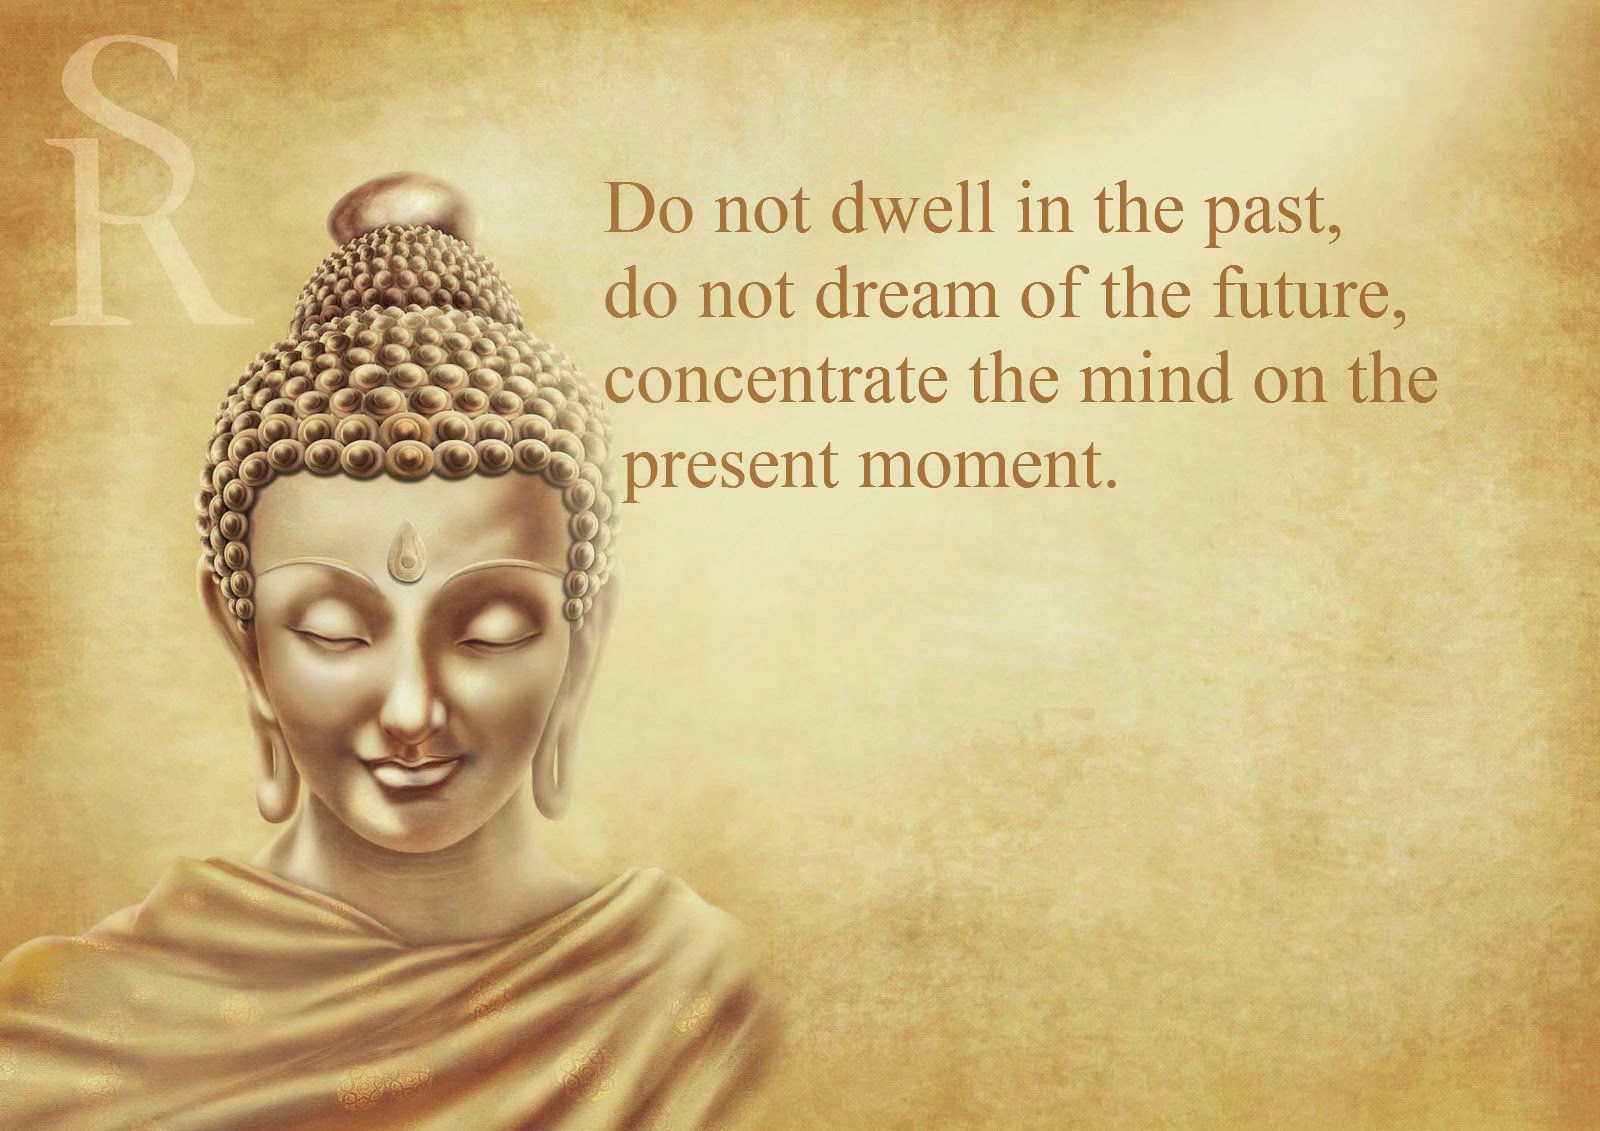  Wallpaper Quotes Movie List Wallpapers Of Lord Buddha Quotes